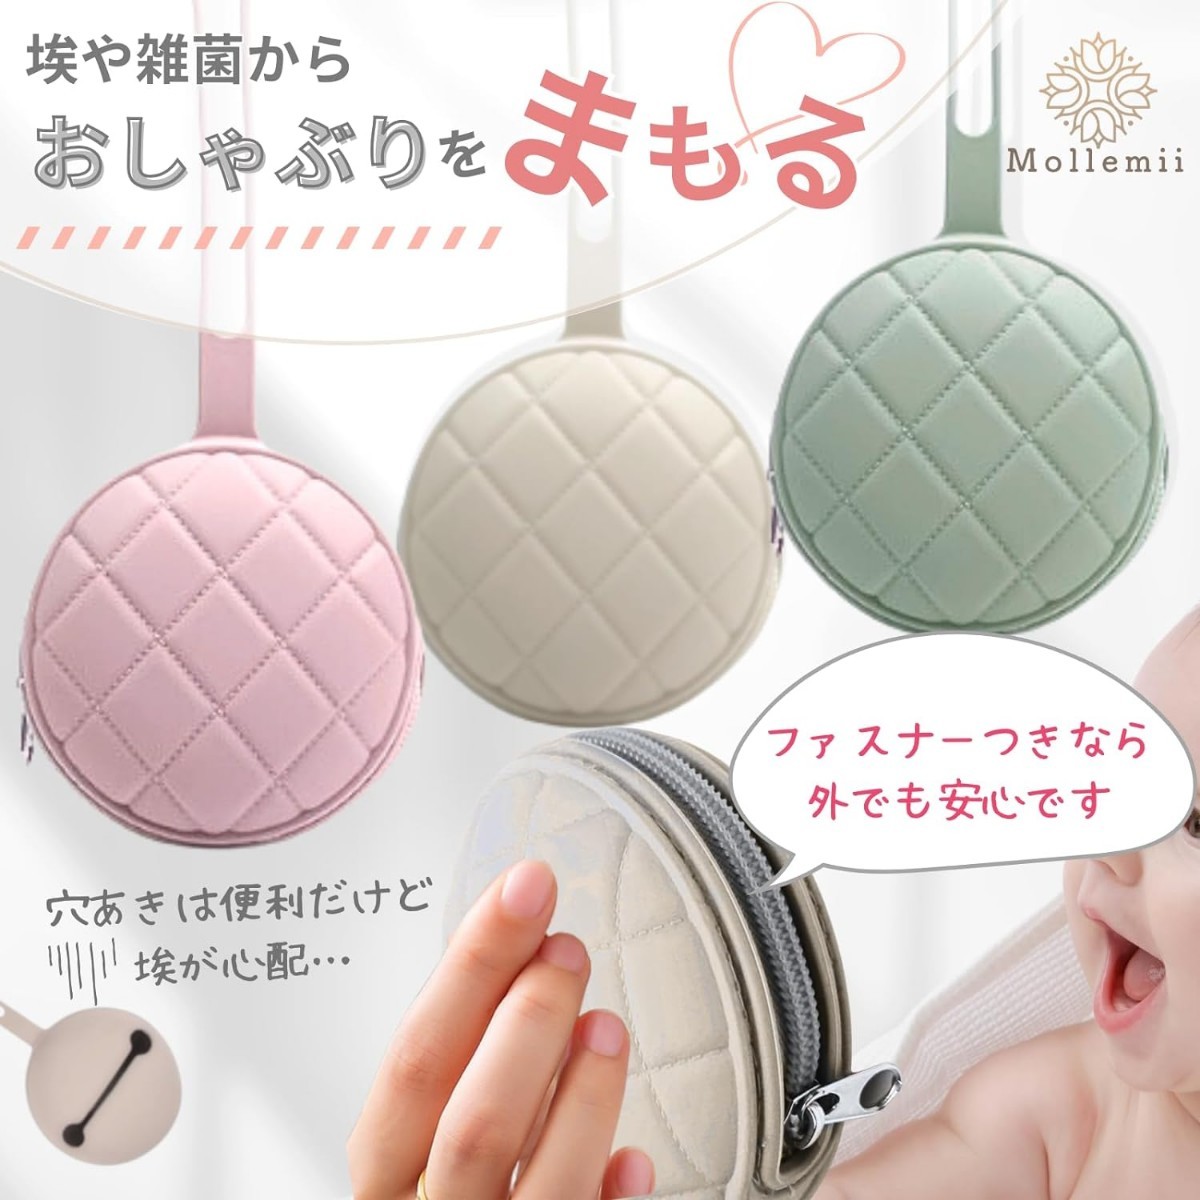  new goods regular price 1,999 jpy light gray color pacifier case holder strap silicon fastener stroller carrying quilting manner pouch 